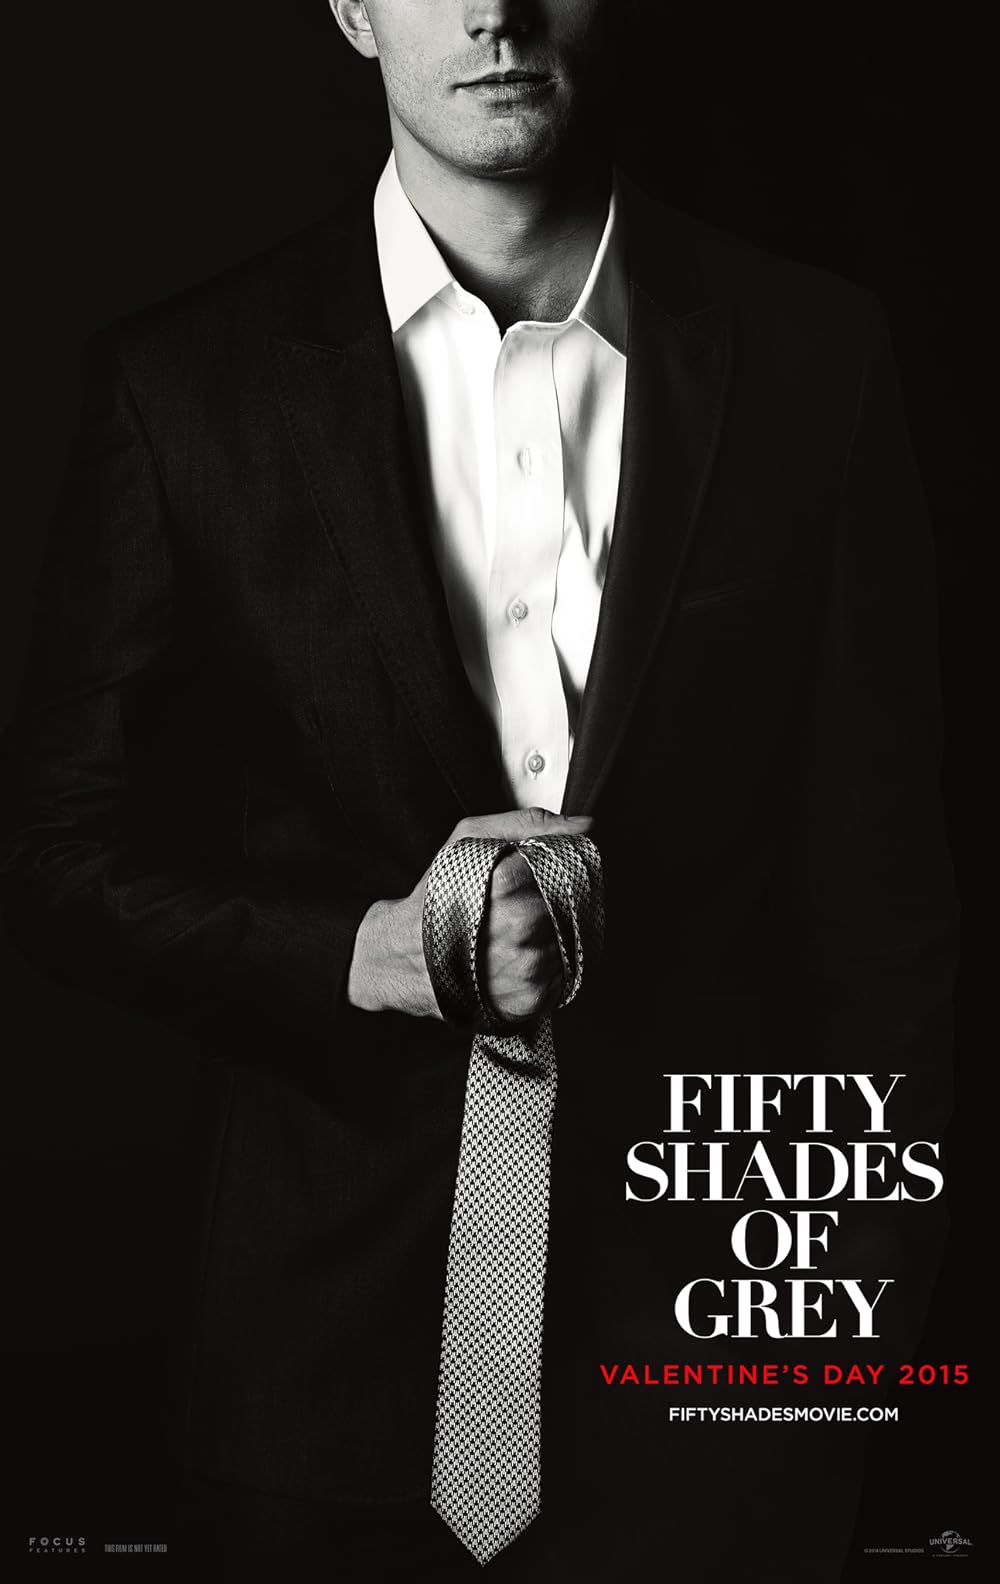 cole hayes share fifty shades of gray movie online photos